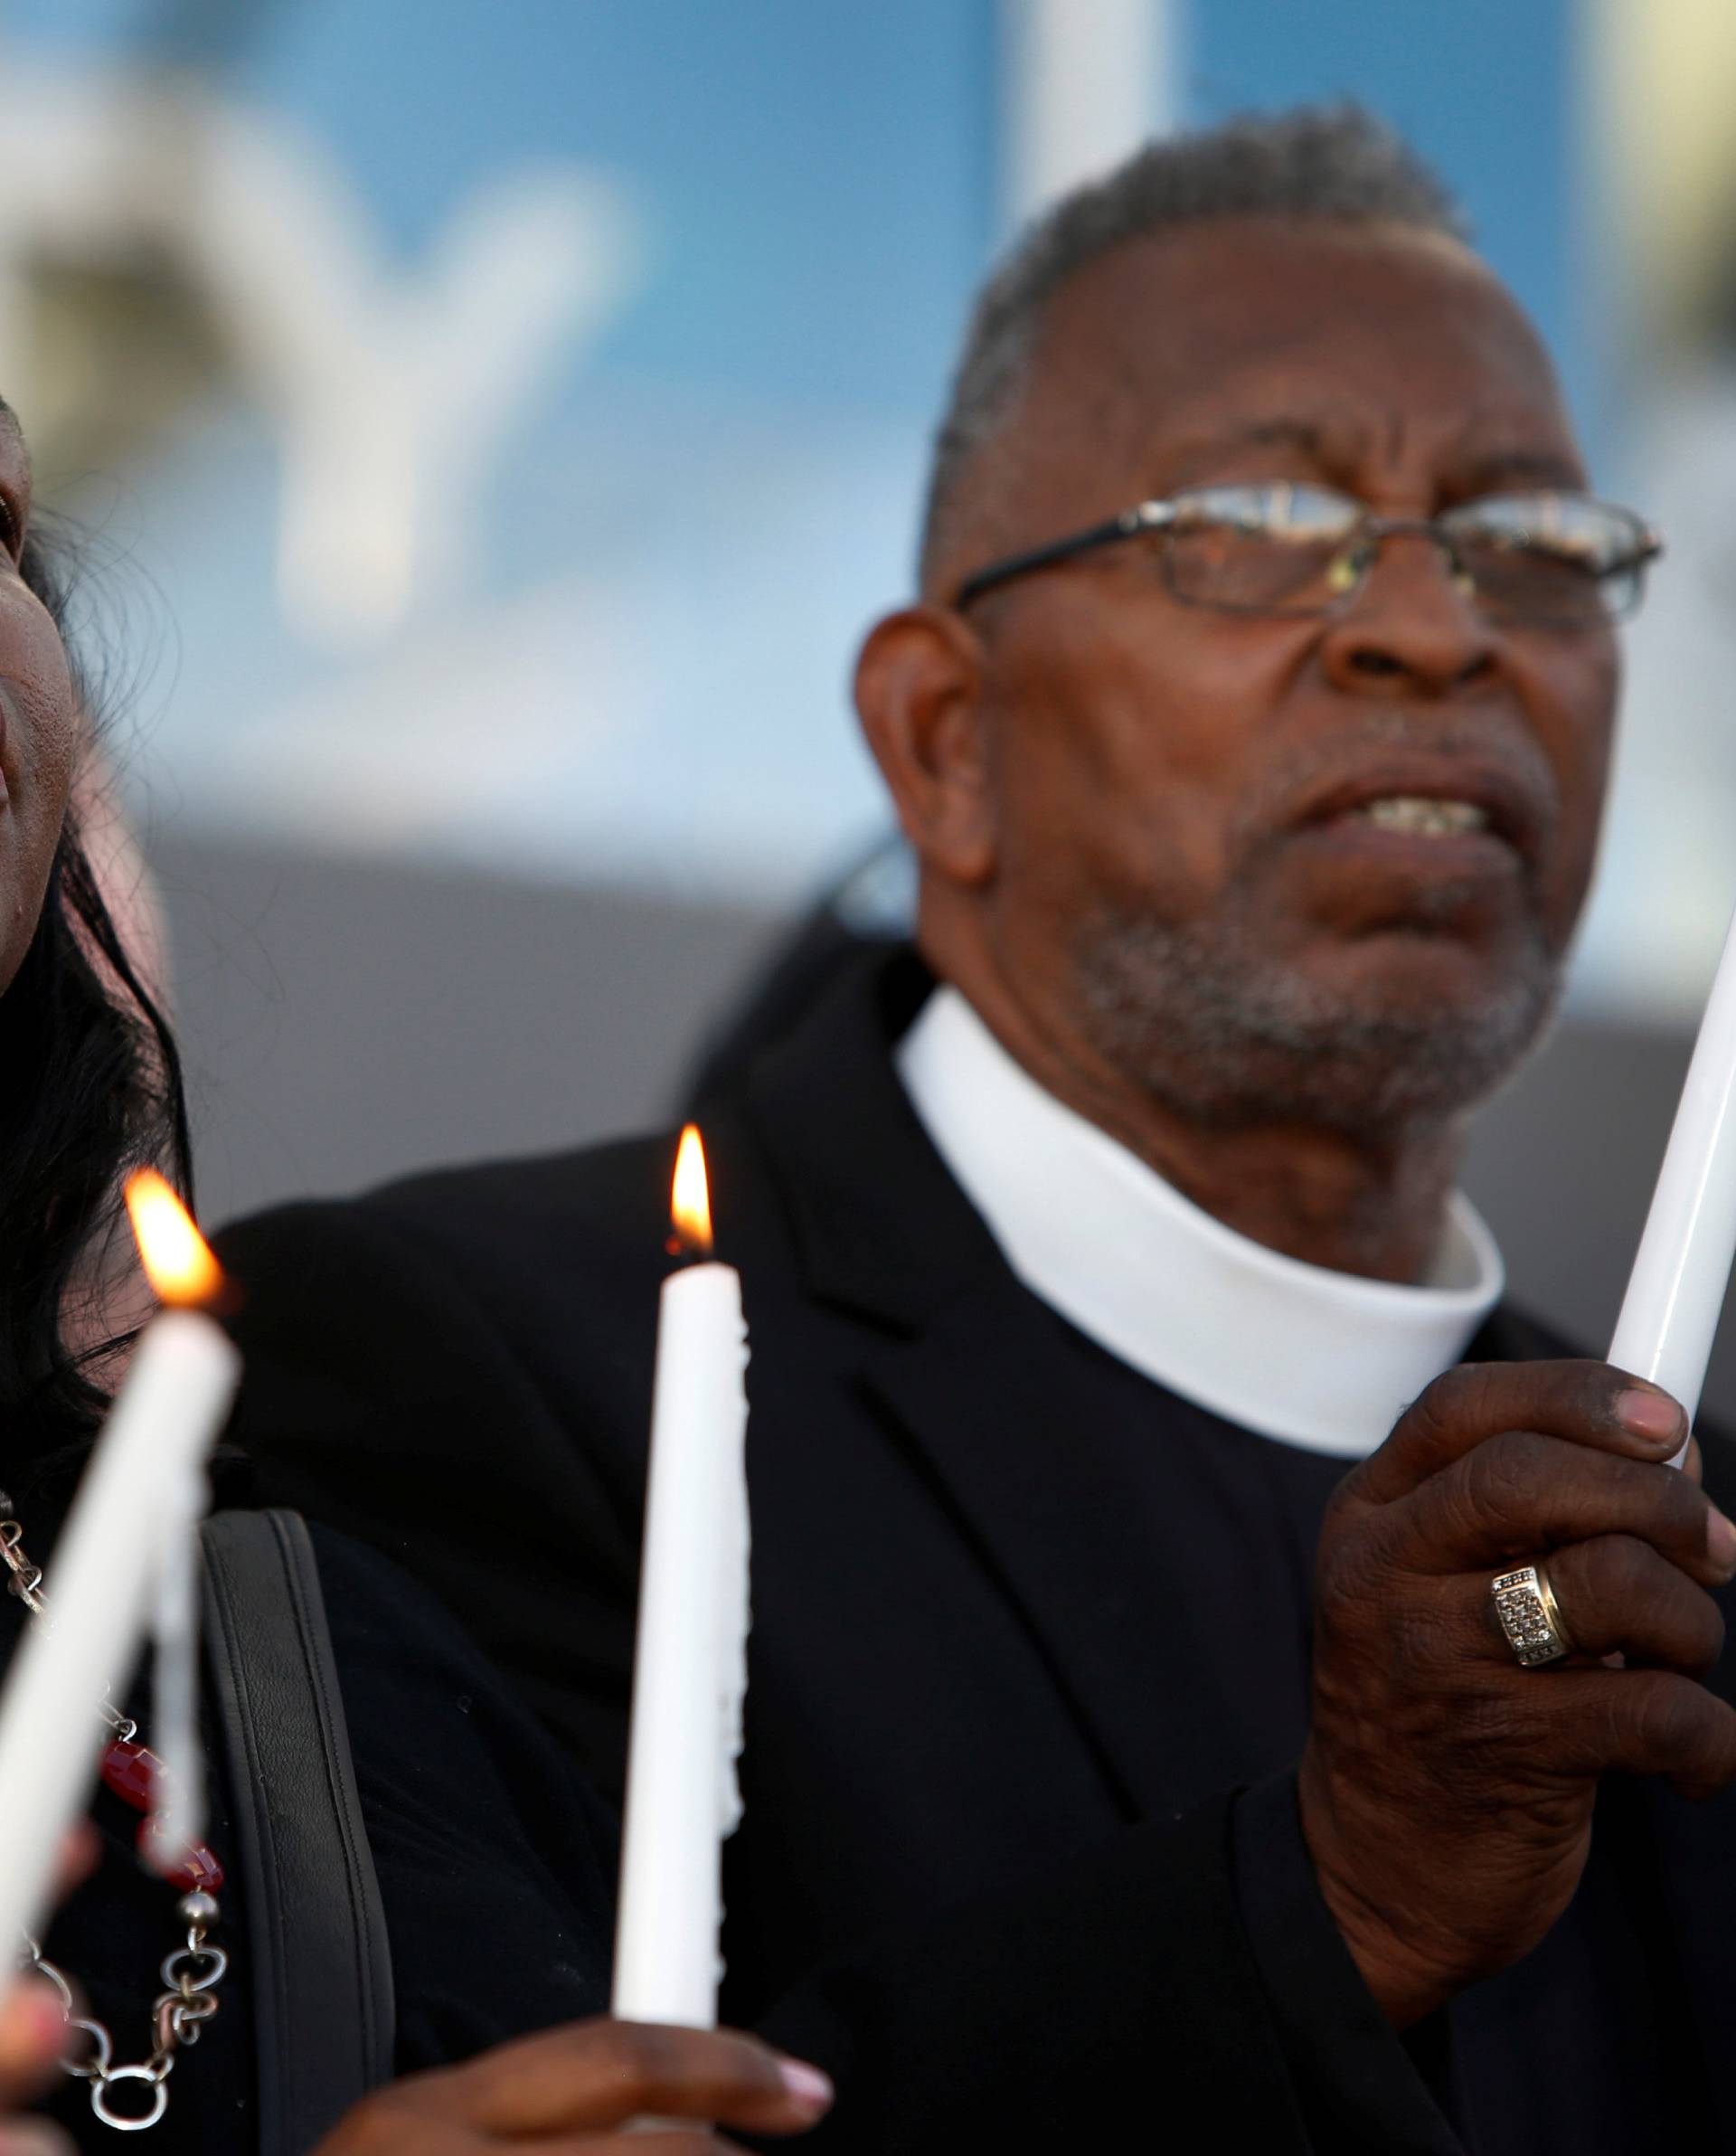 Tyler and Pastor McCurdy hold candles during a prayer vigil in honor of those affected by the shooting in Las Vegas